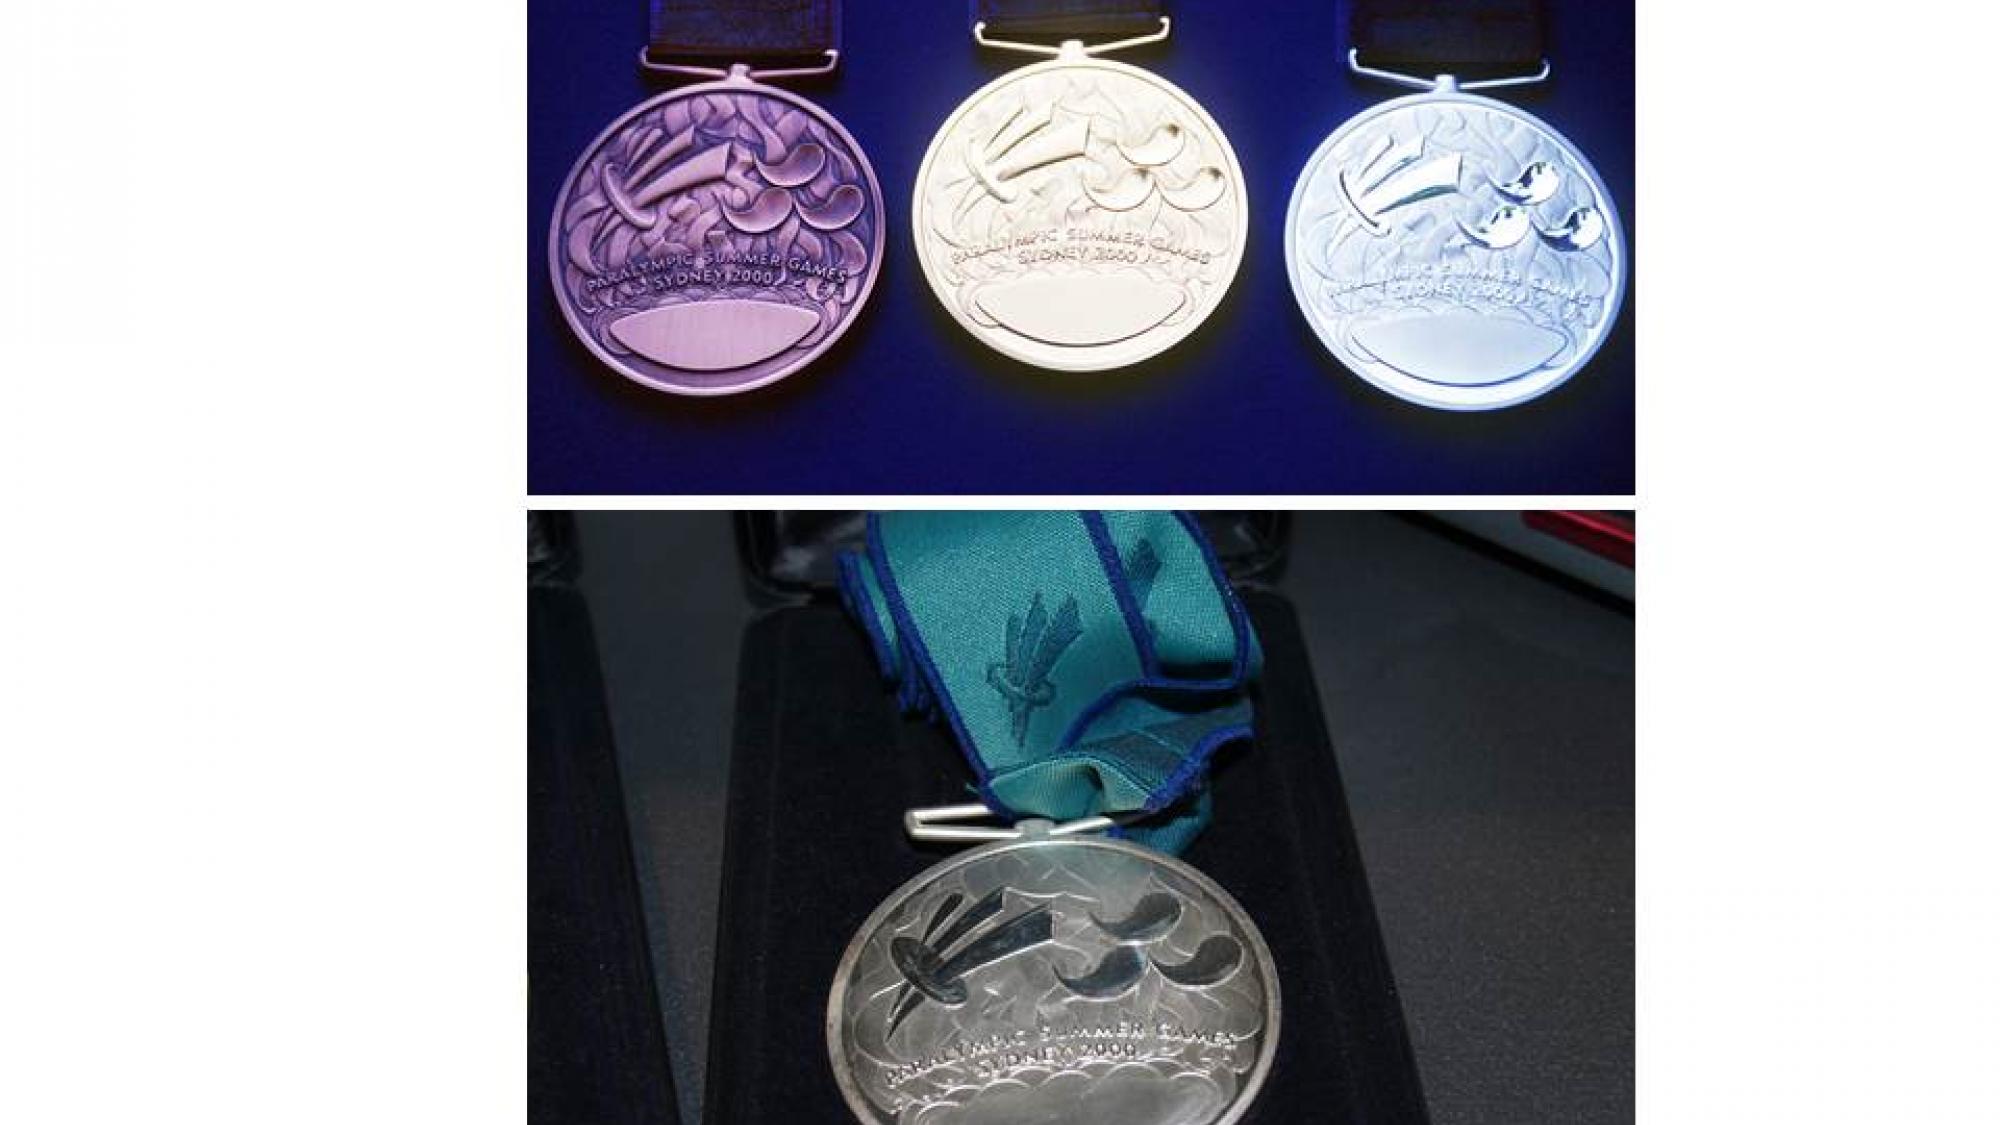 Sydney 2000 Paralympic medals